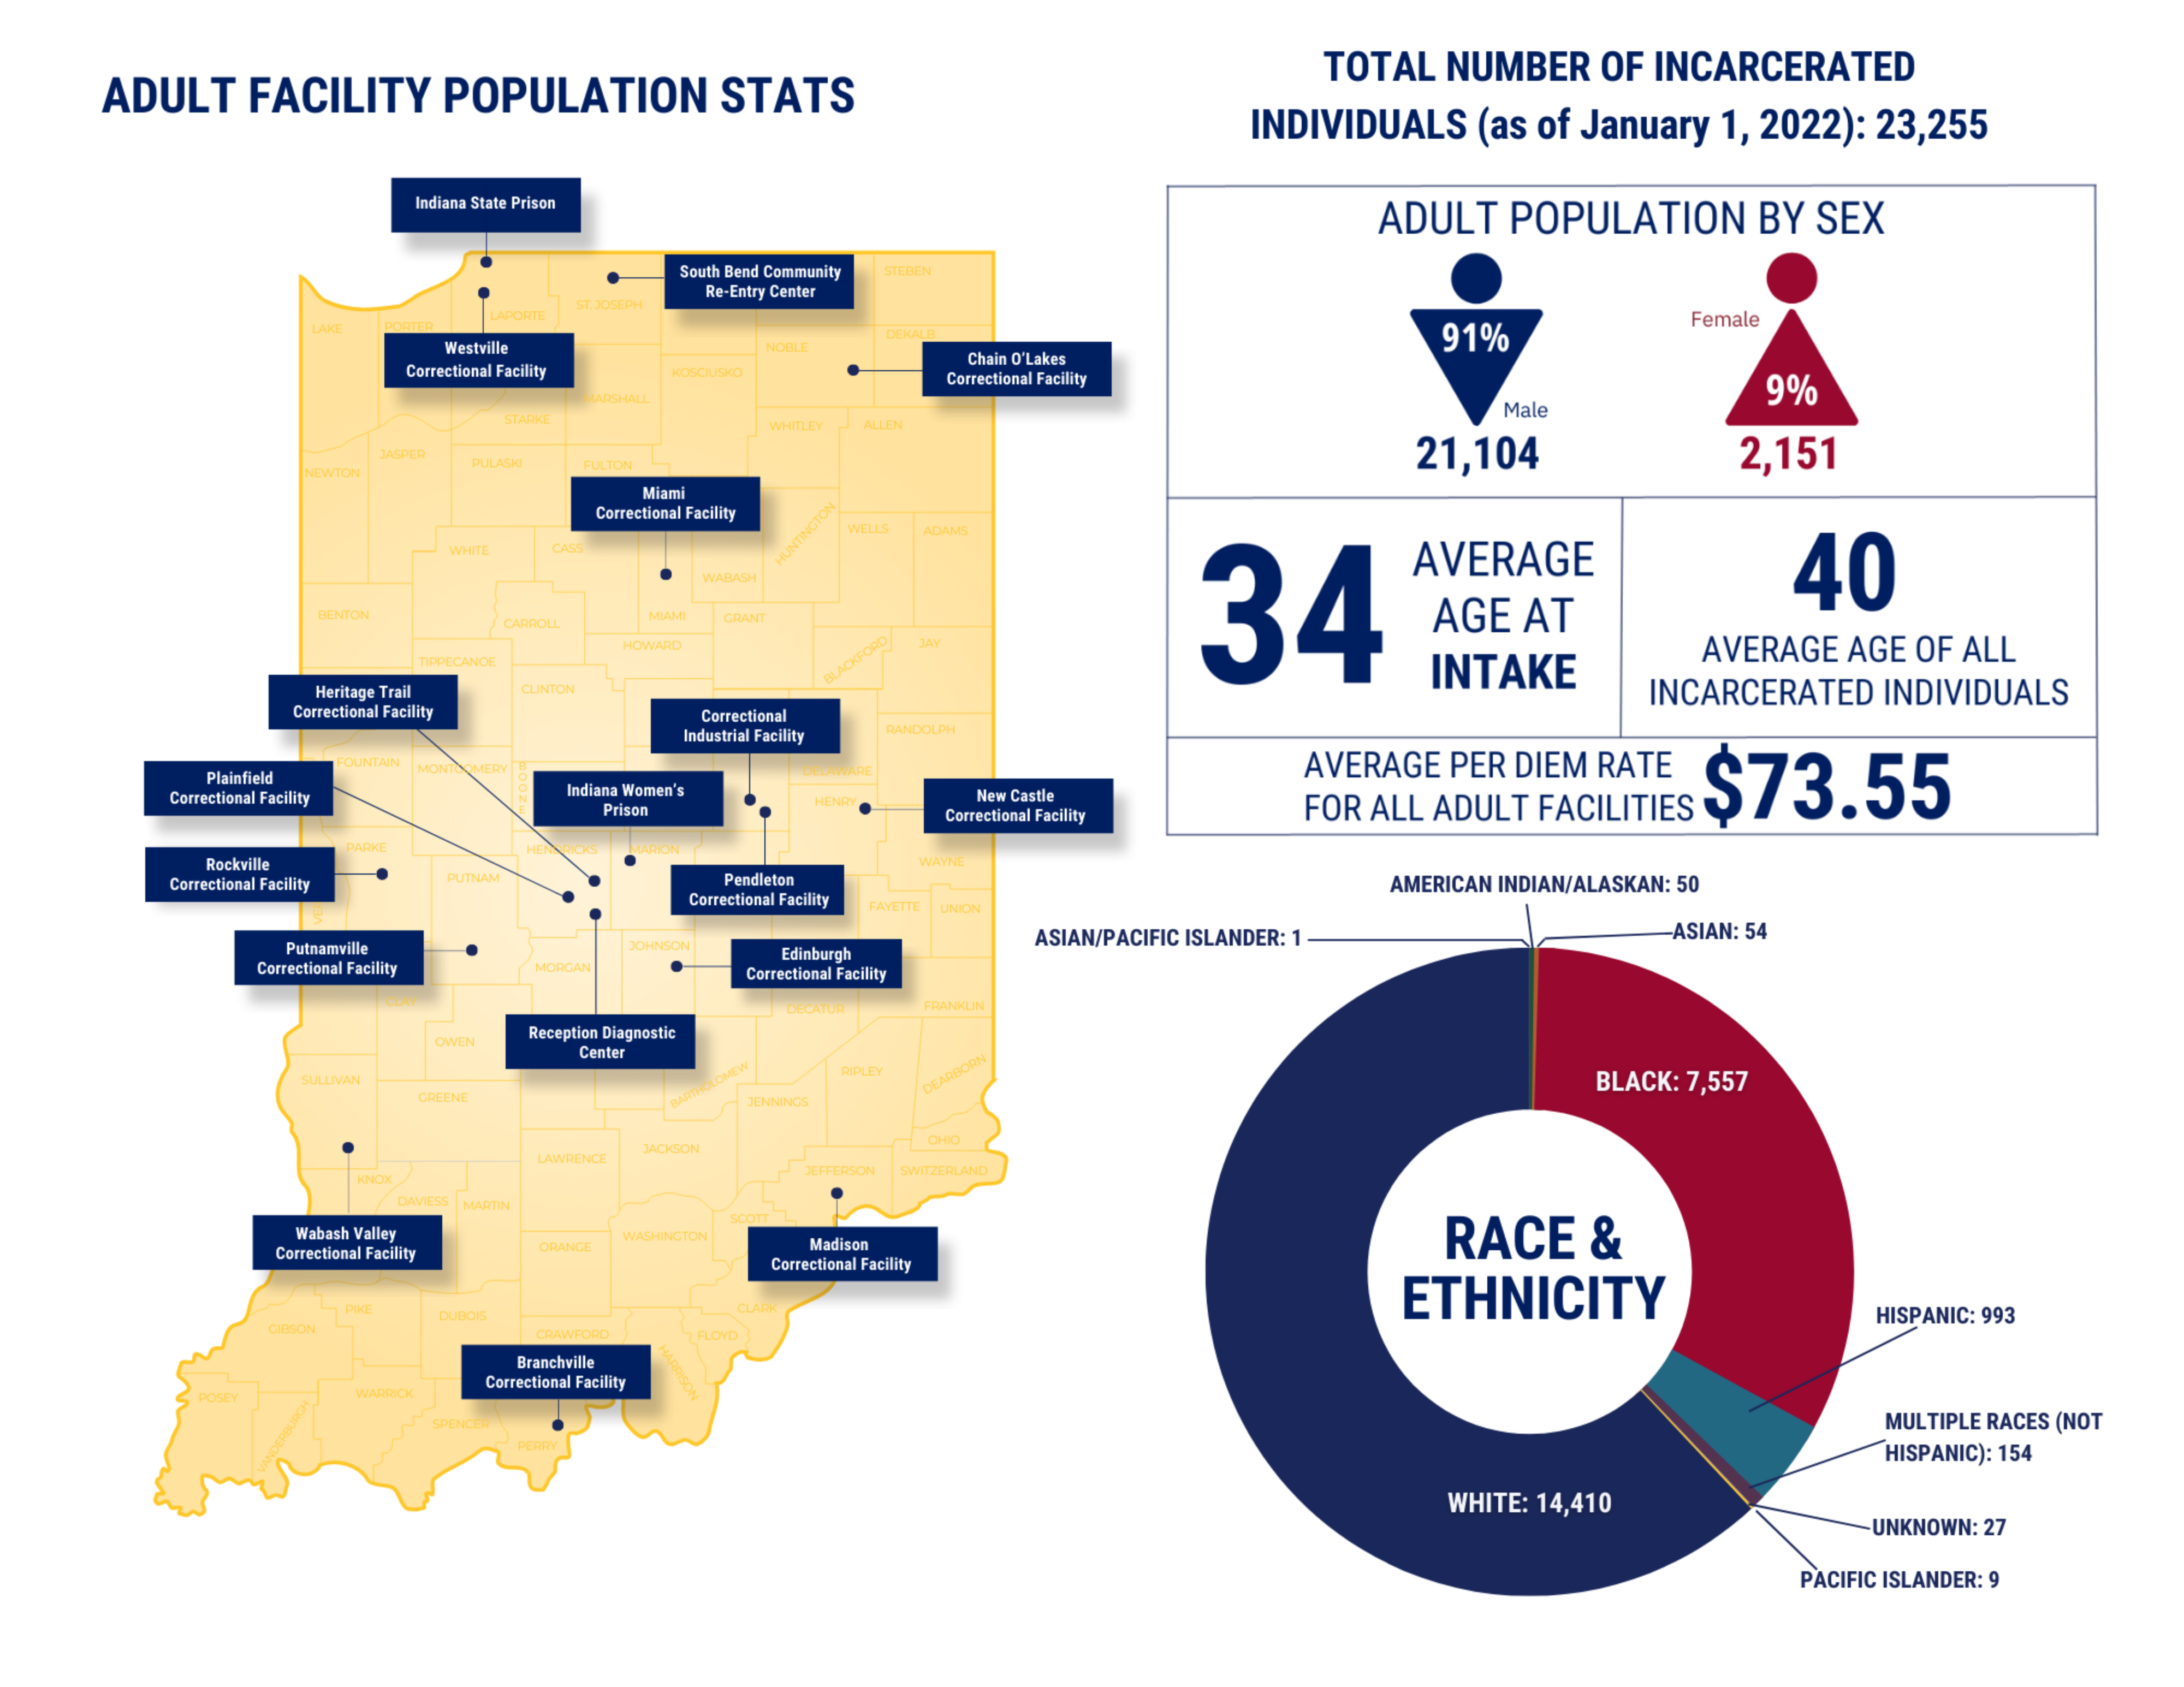 Indiana Department of Correction has 18 adult facilities. The total number of incarcerated individuals as of January 1, 2022 was 23,255 with the average age at intake being 34 and the average age of all Incarcerated individuals being 40.  Of those individuals 14,410 identify as White, 7,557 Black, 993 Hispanic, 54 Asian, 50 American Indian/Alaskan, 9 Pacific Islander, 154 were multiple races (not Hispanic), 1 Asian/Pacific Islander, and 27 are unknown. 